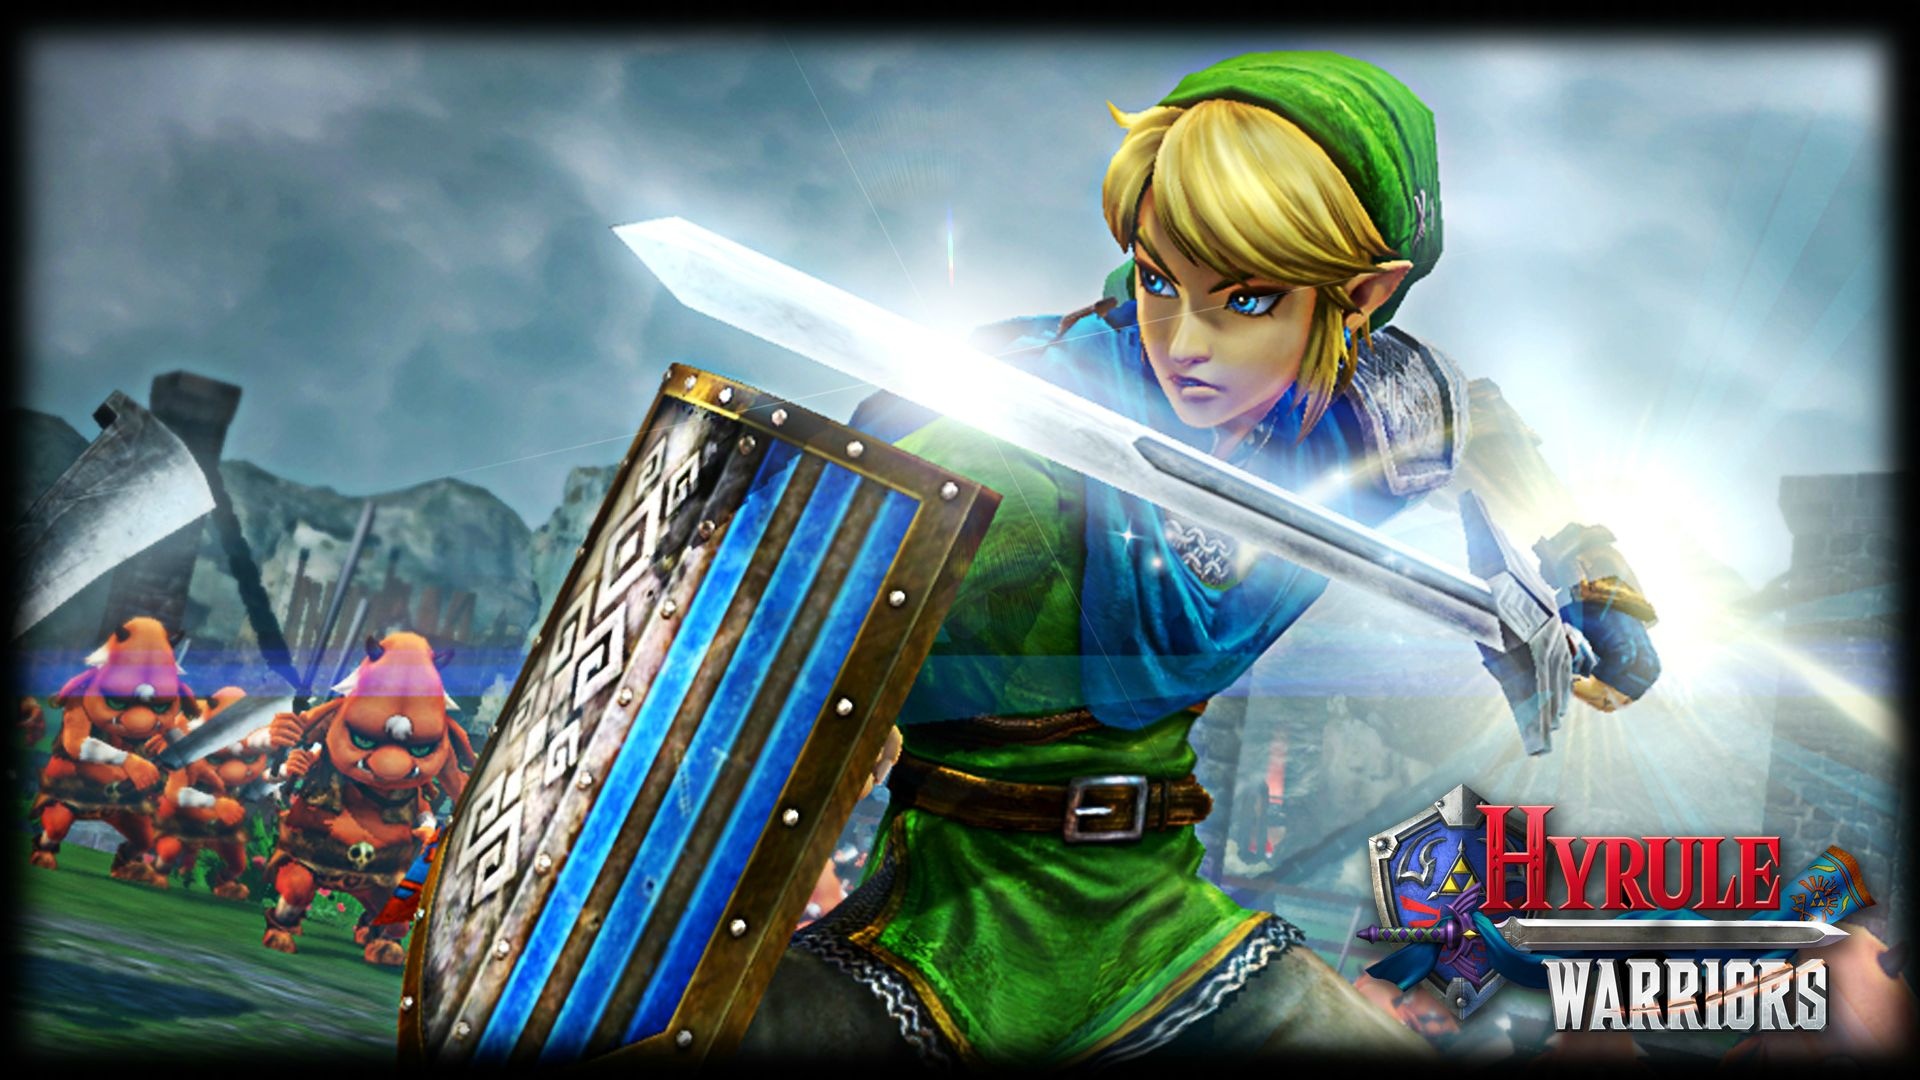 Hyrule Warriors Wallpapers posted by Ethan Mercado 1920x1080